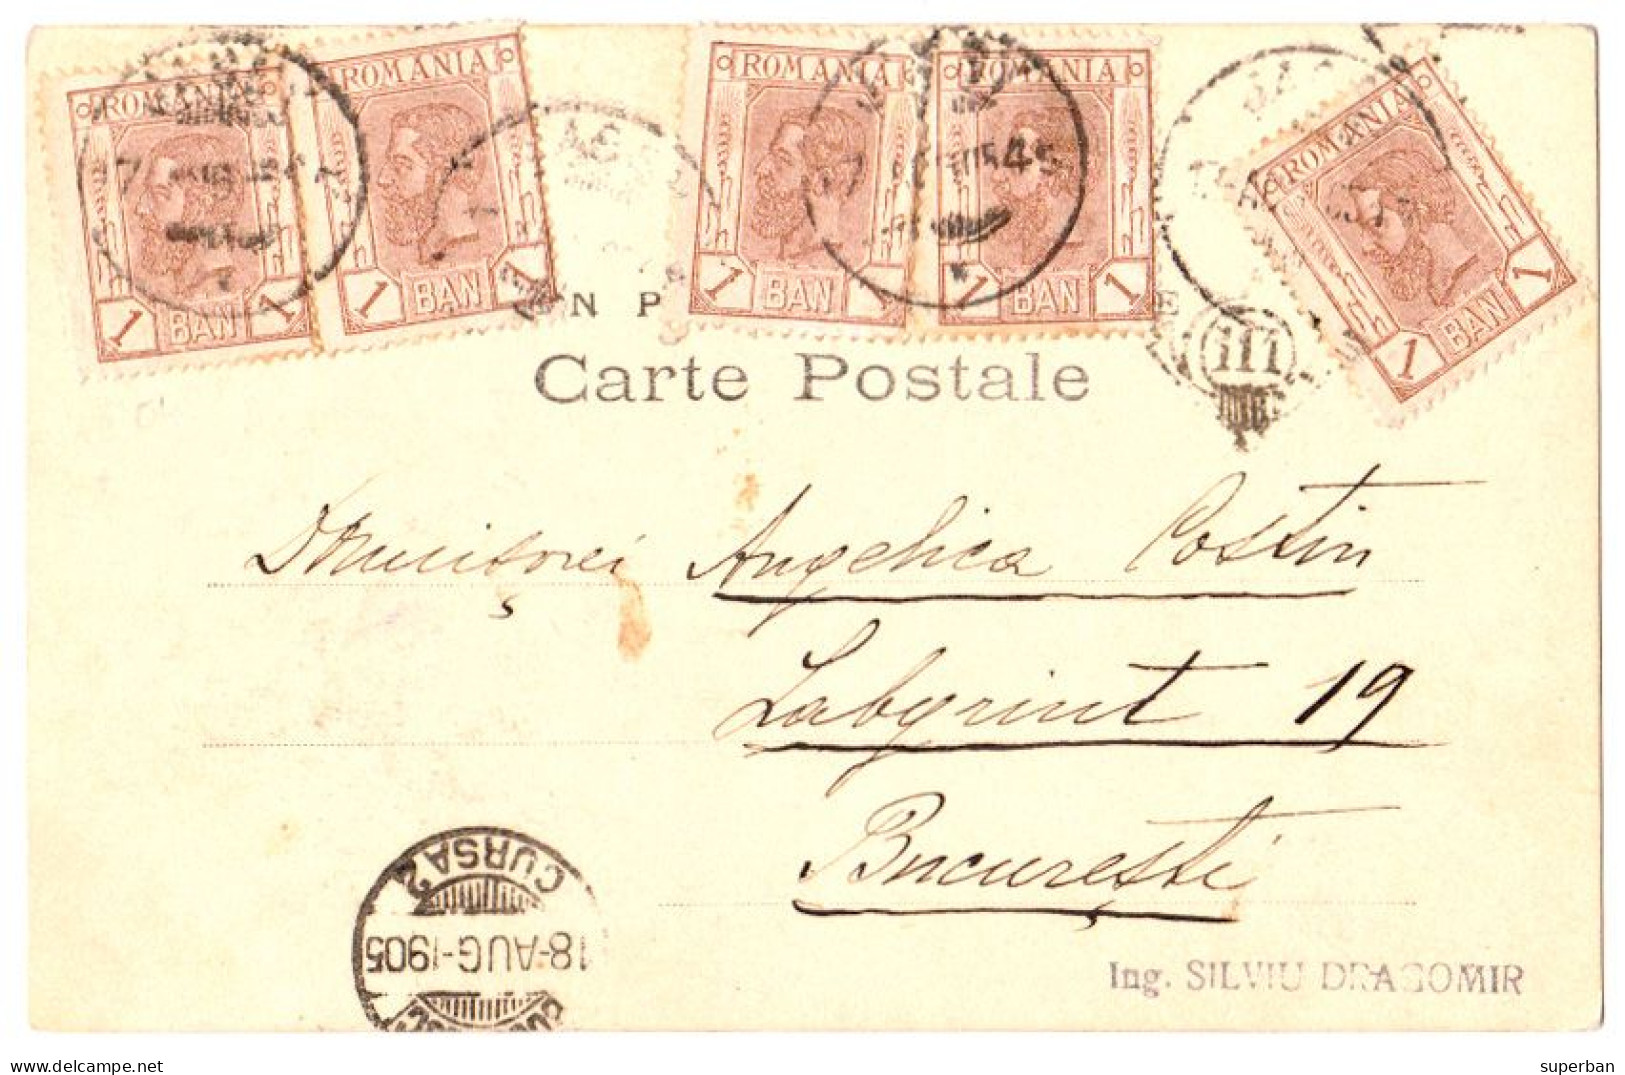 ROMANIA : IASI / JASSY - BEL AFFRANCHISSEMENT MUILTIPLE / NICE FRANKING POSTAGE : 5 TIMBRES / 5 STAMPS - 1905 (an336) - Storia Postale